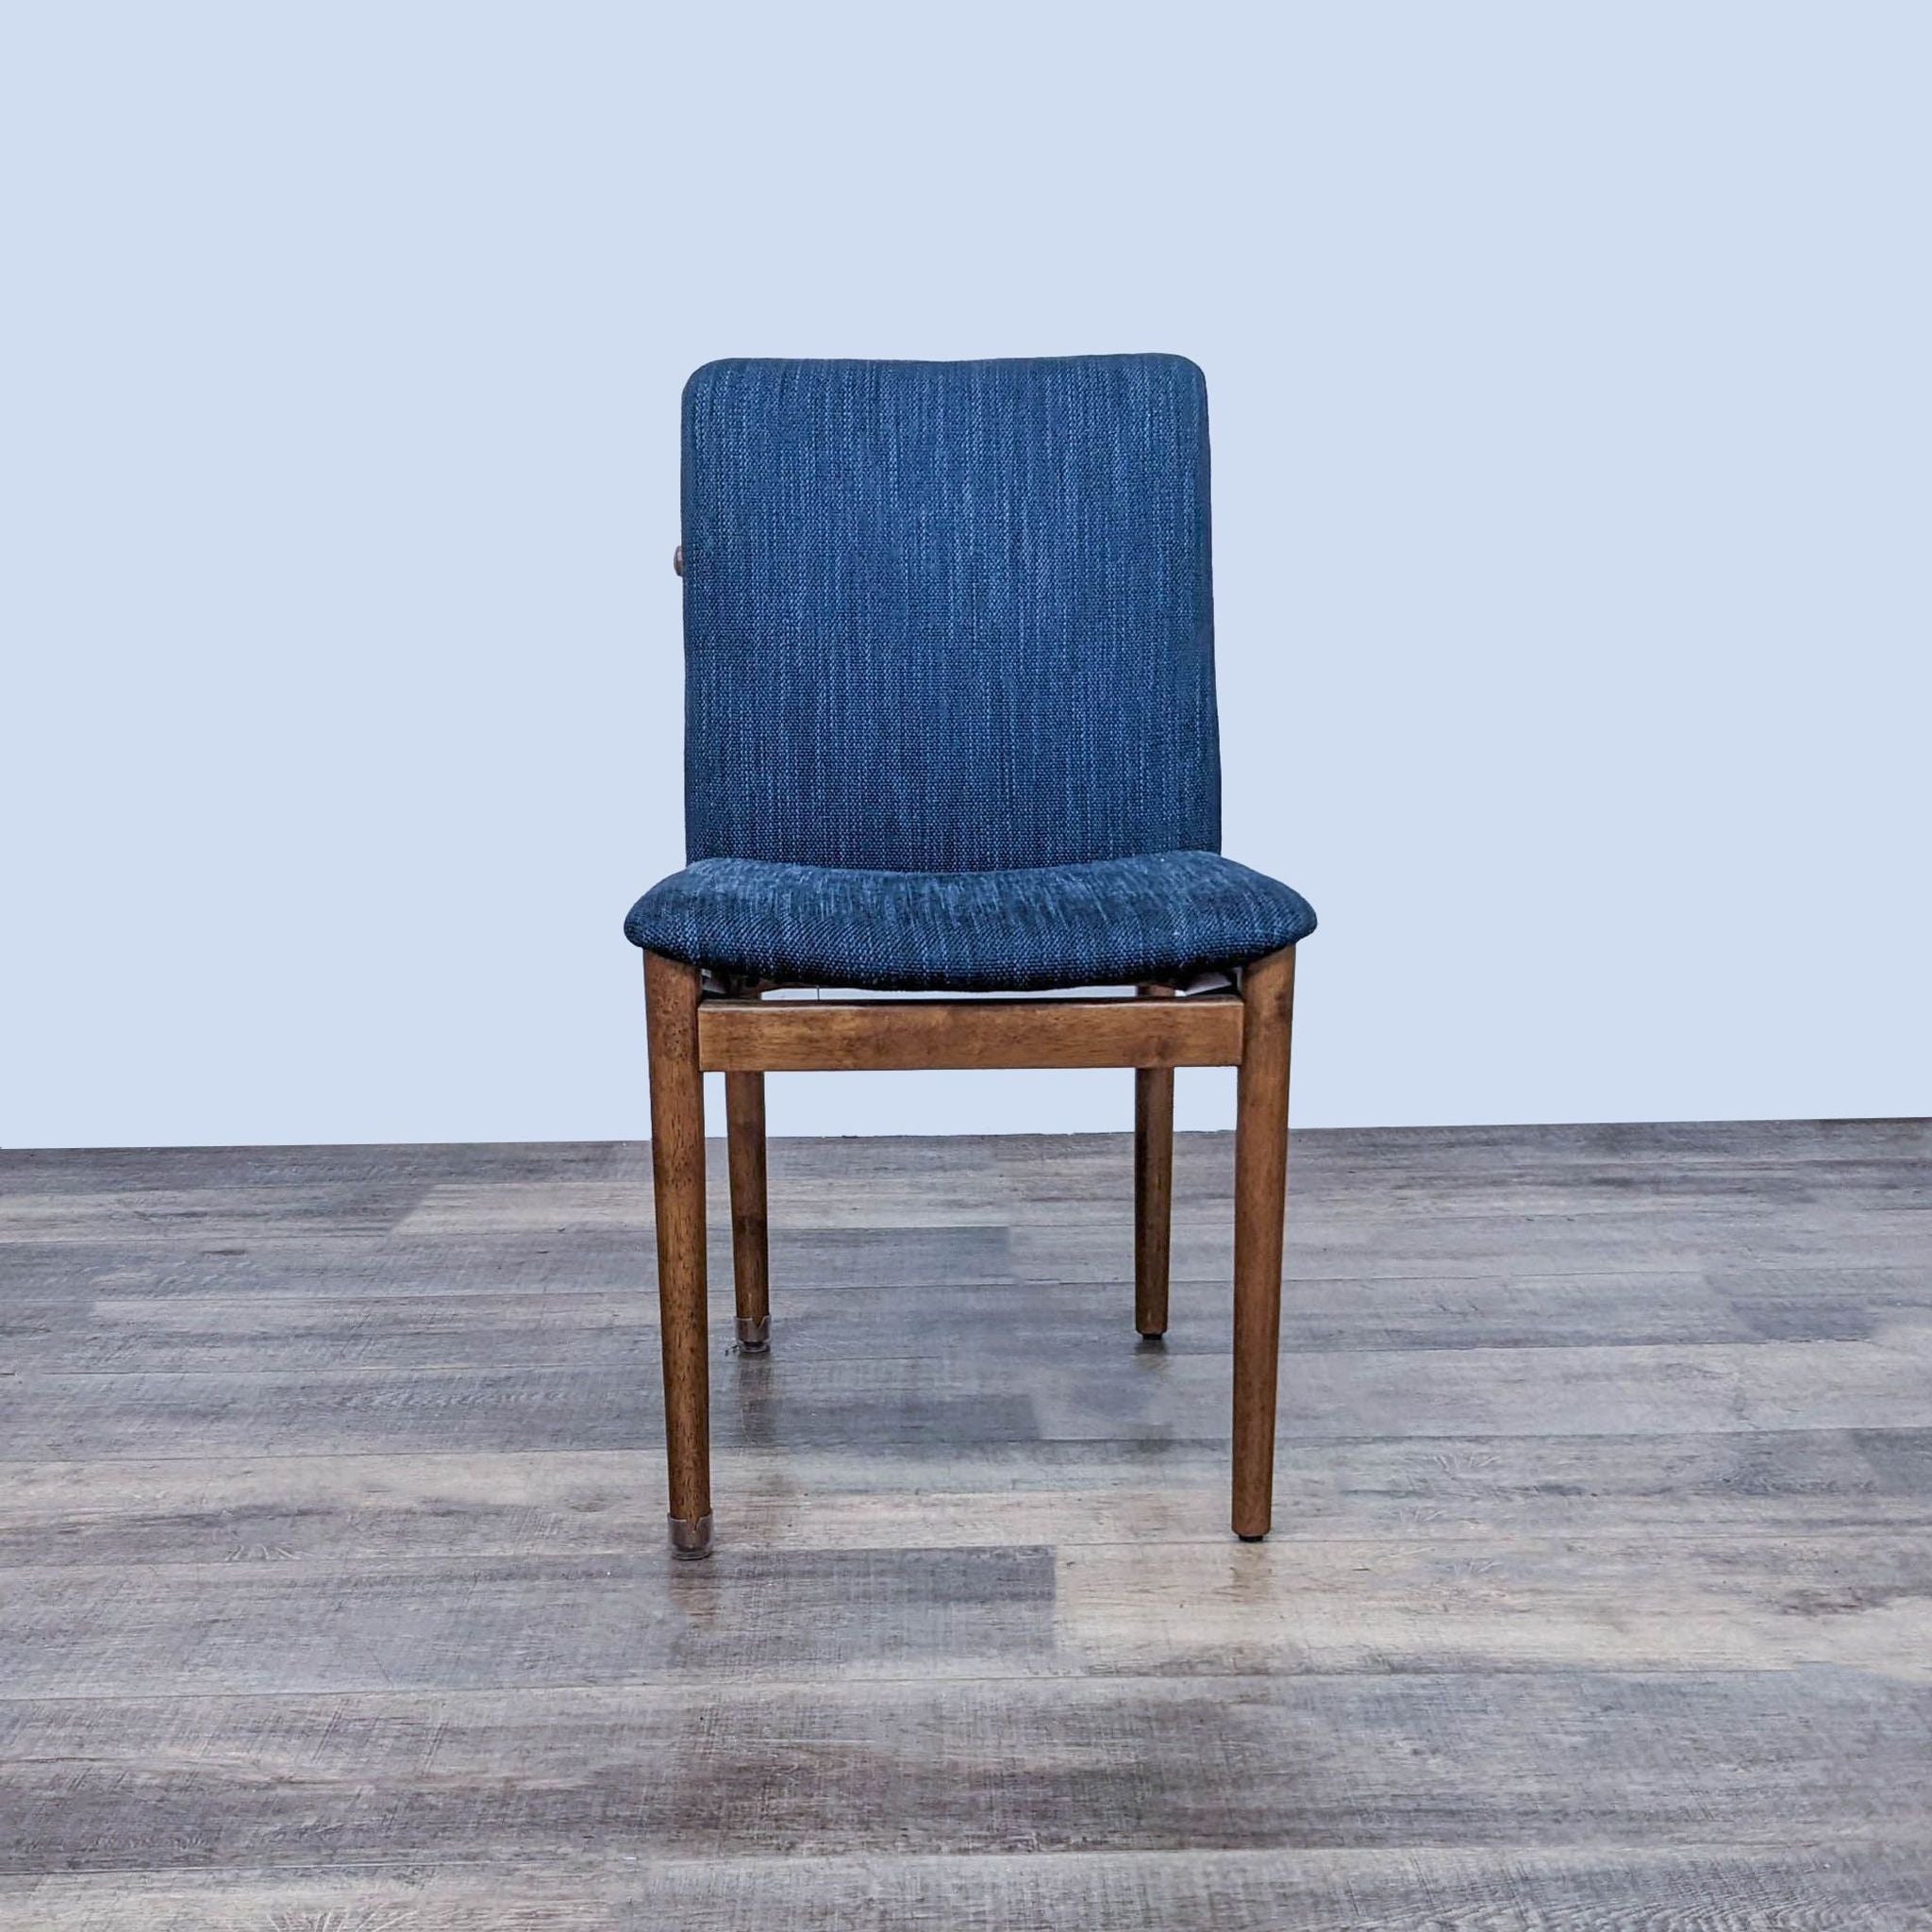 West Elm Modern Framework dining chair with denim-like blue fabric cushion and brown wooden frame, front view on a wooden floor.